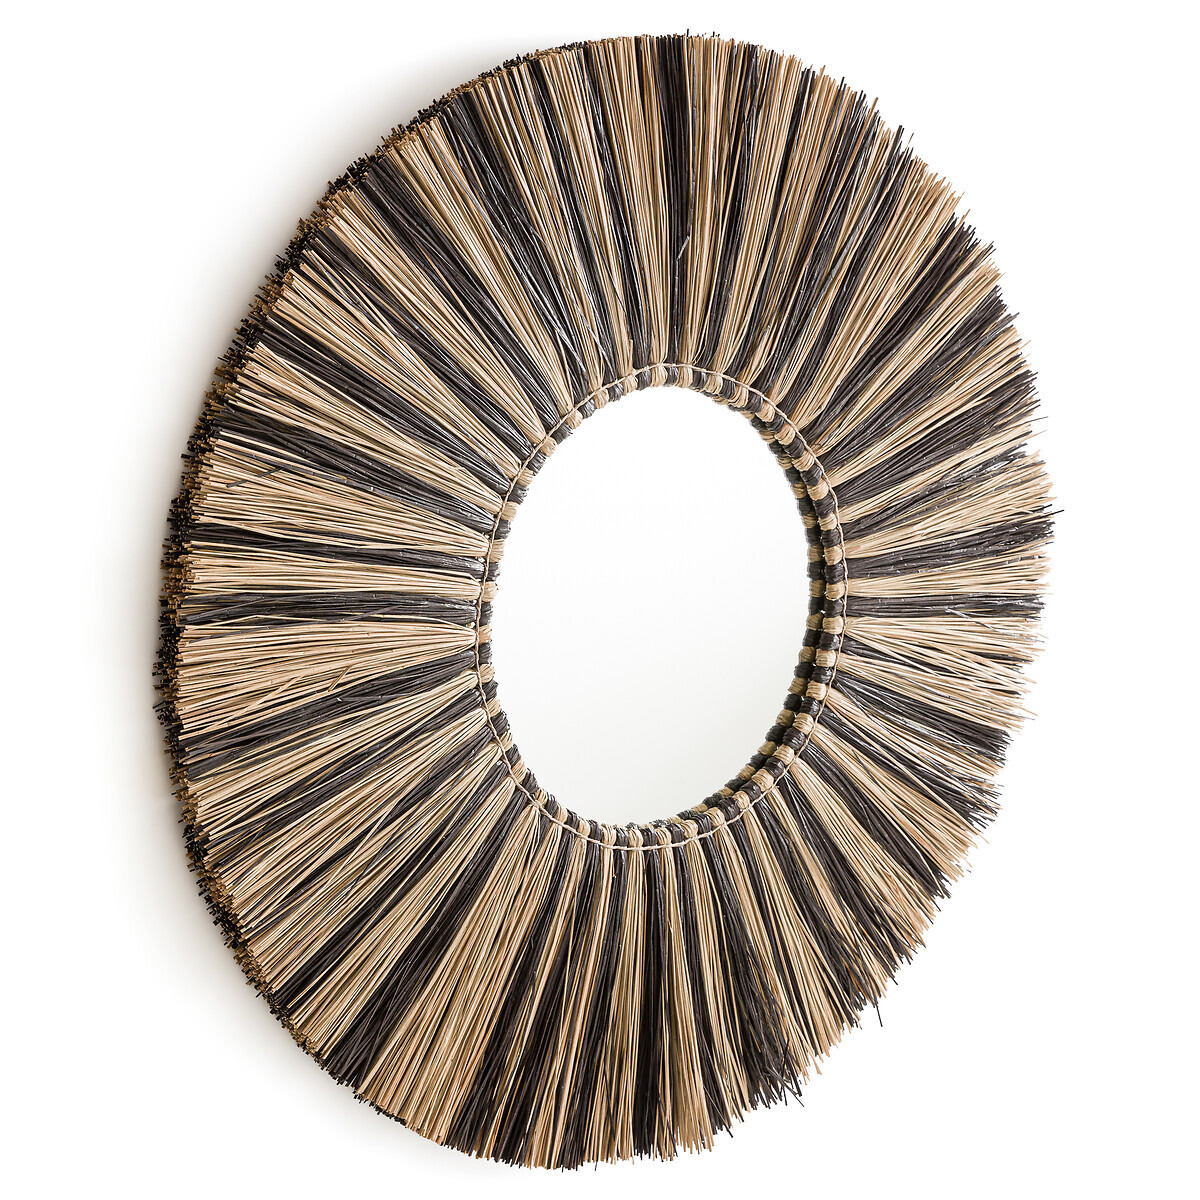 Loully 100cm Diameter Round Mendong Mirror - image 1